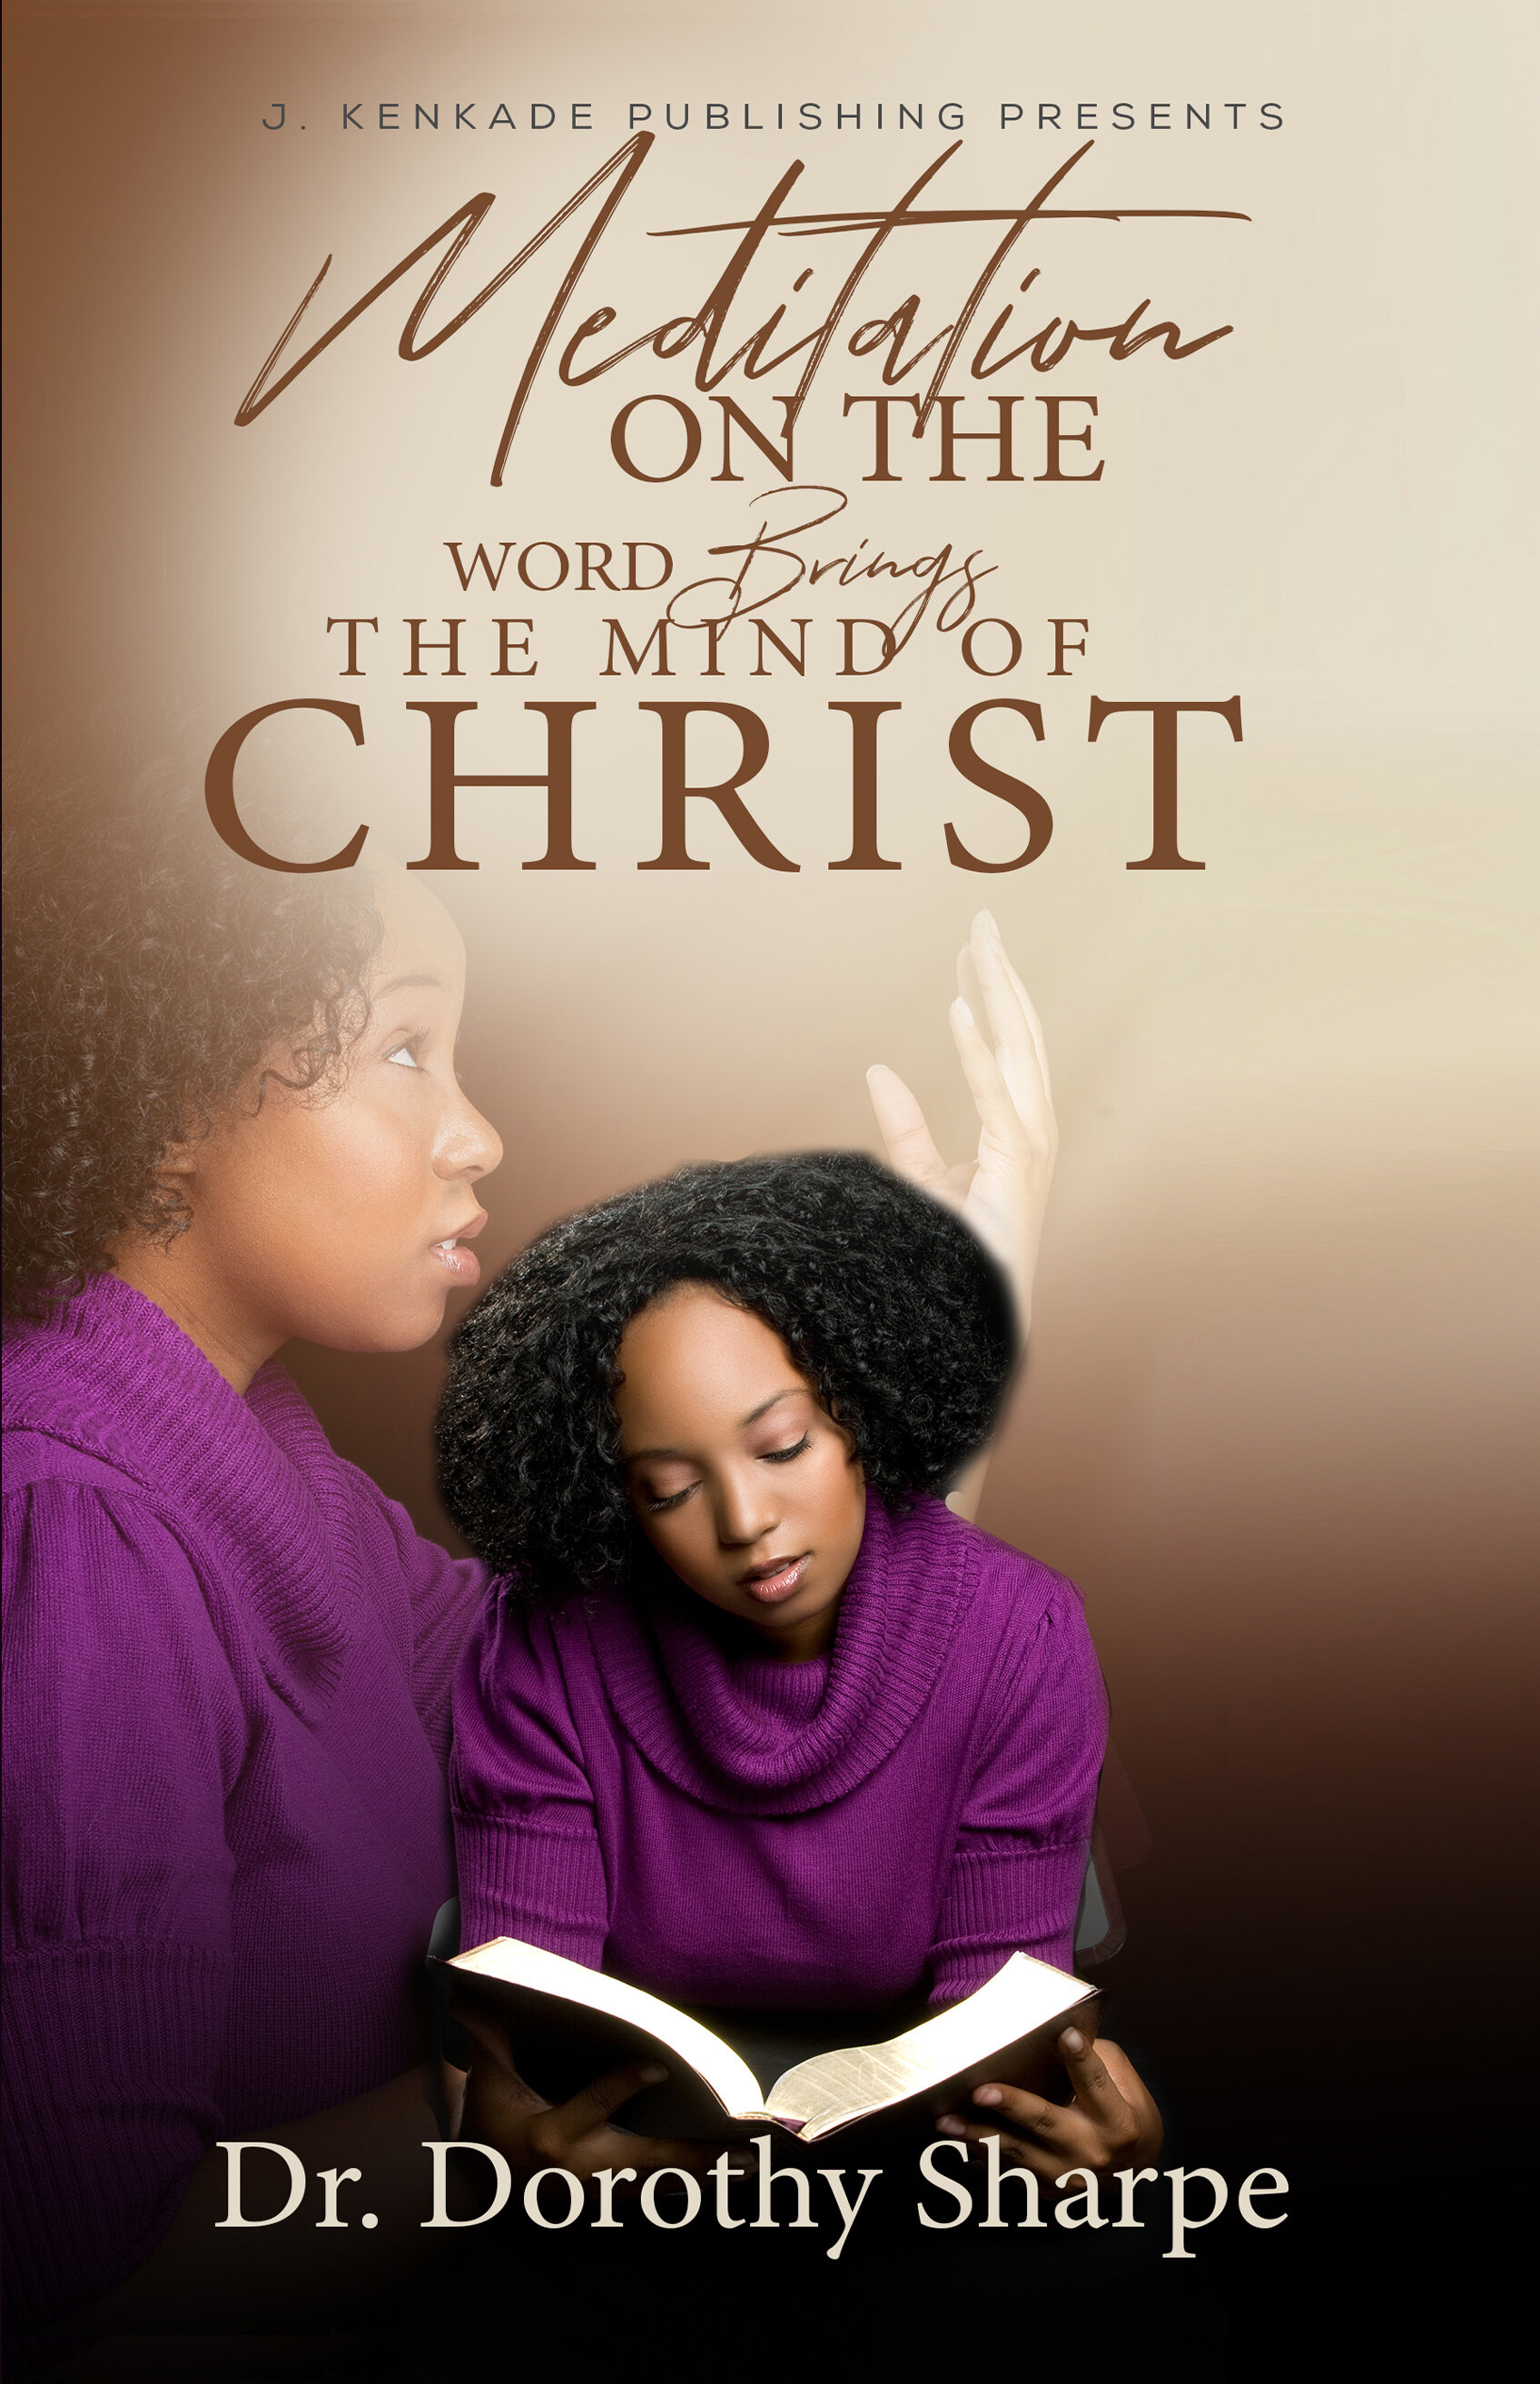 Meditation on the Word Brings the Mind of Christ